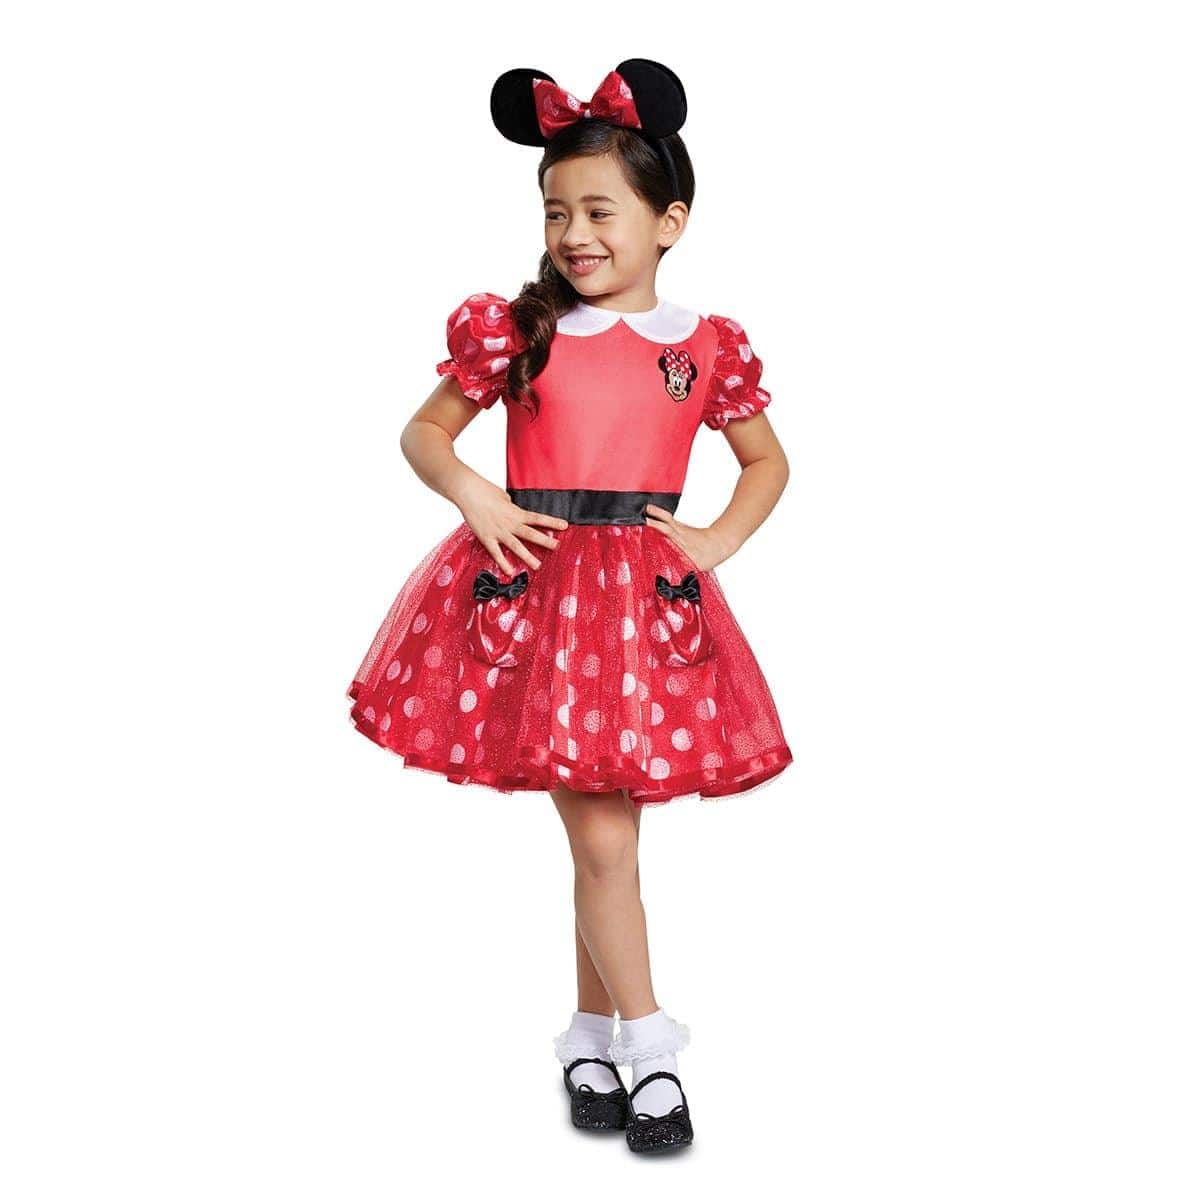 Buy Costumes Minnie Mouse Costume for Babies & Toddlers, Disney sold at Party Expert